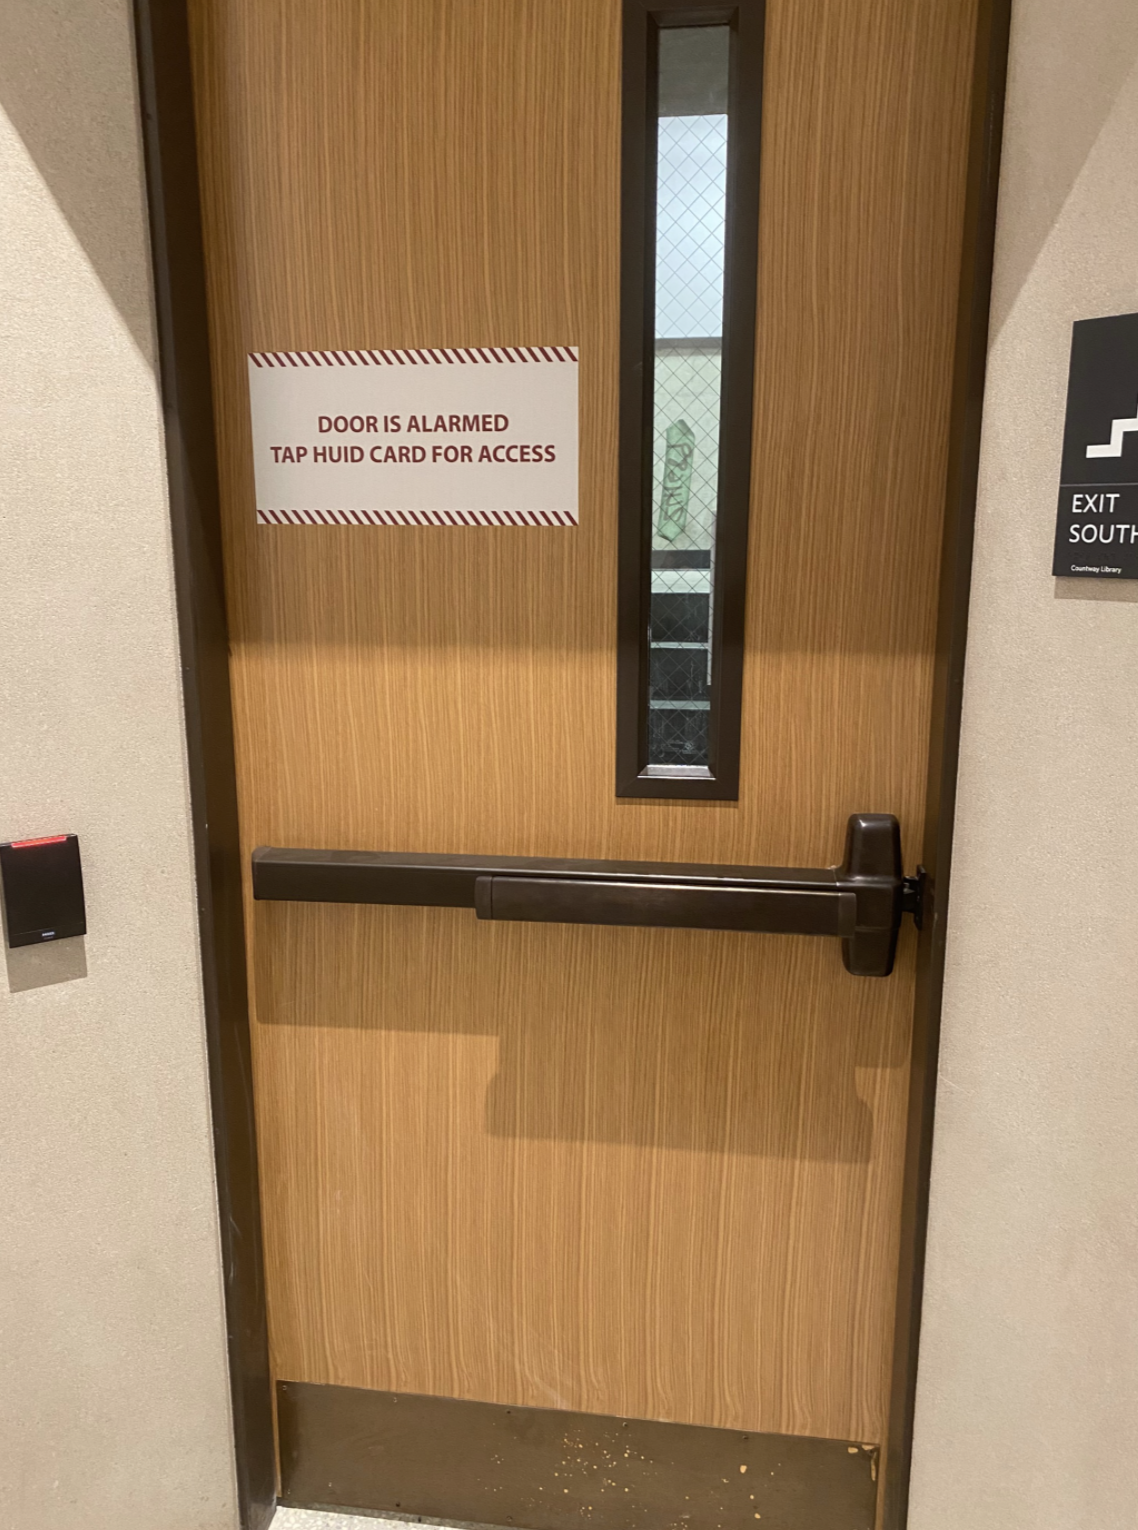 Emergency exit door with a sign that says door is alarmed; tap HUID card for access.